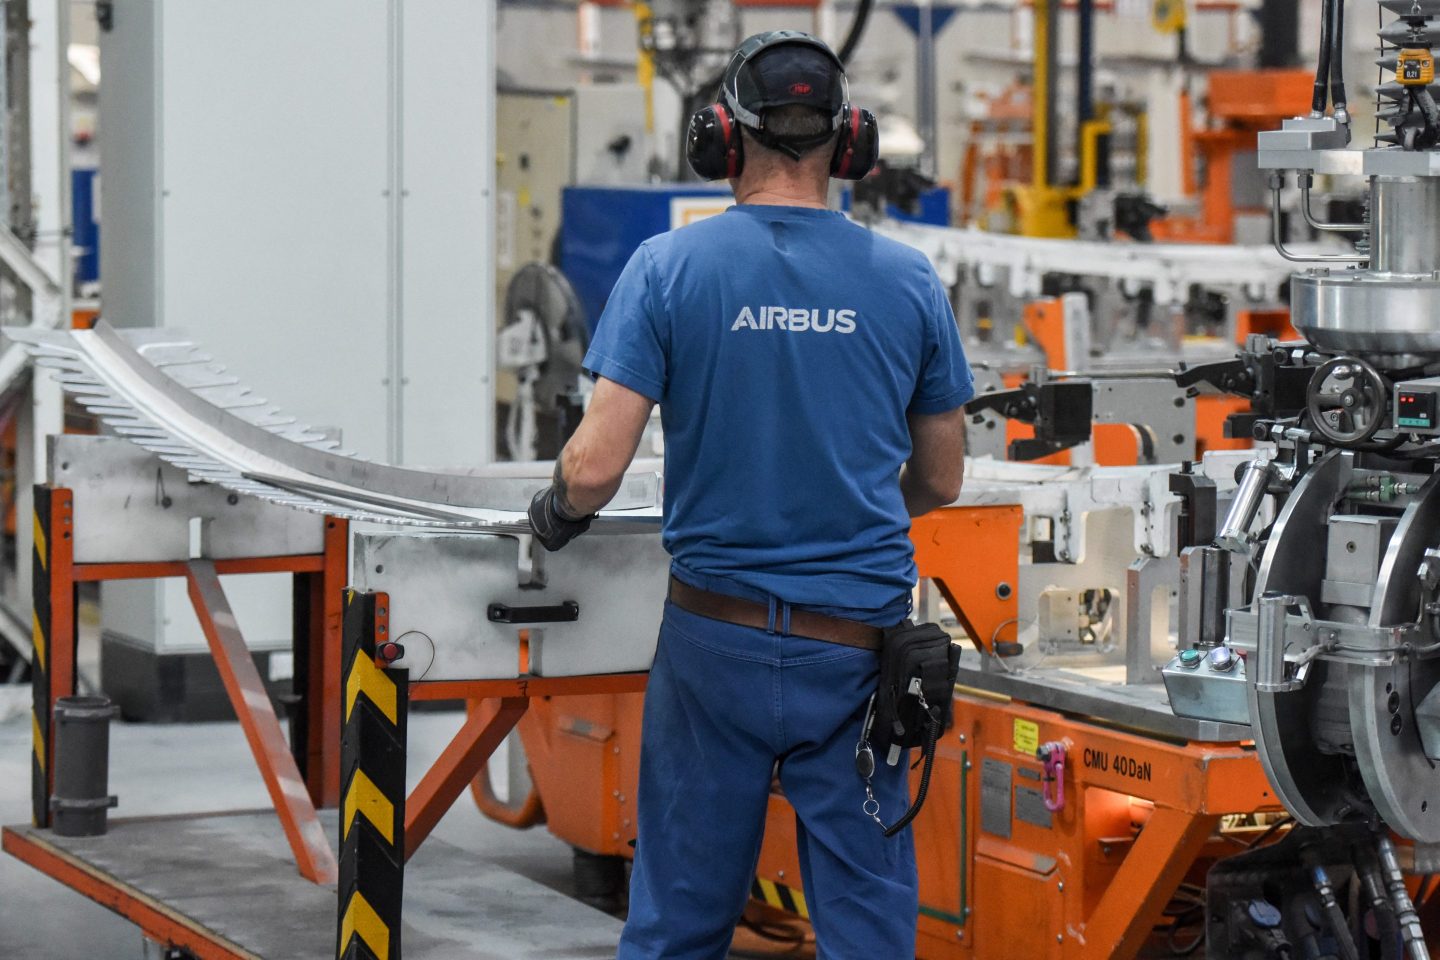 An Airbus&#8217; employee works on an aircraft part of the Airbus A350 at the Airbus Atlantic plant in Bouguenais, near Nantes, western France, on February 29, 2024. (Photo by Sebastien SALOM-GOMIS / AFP) (Photo by SEBASTIEN SALOM-GOMIS/AFP via Getty Images)